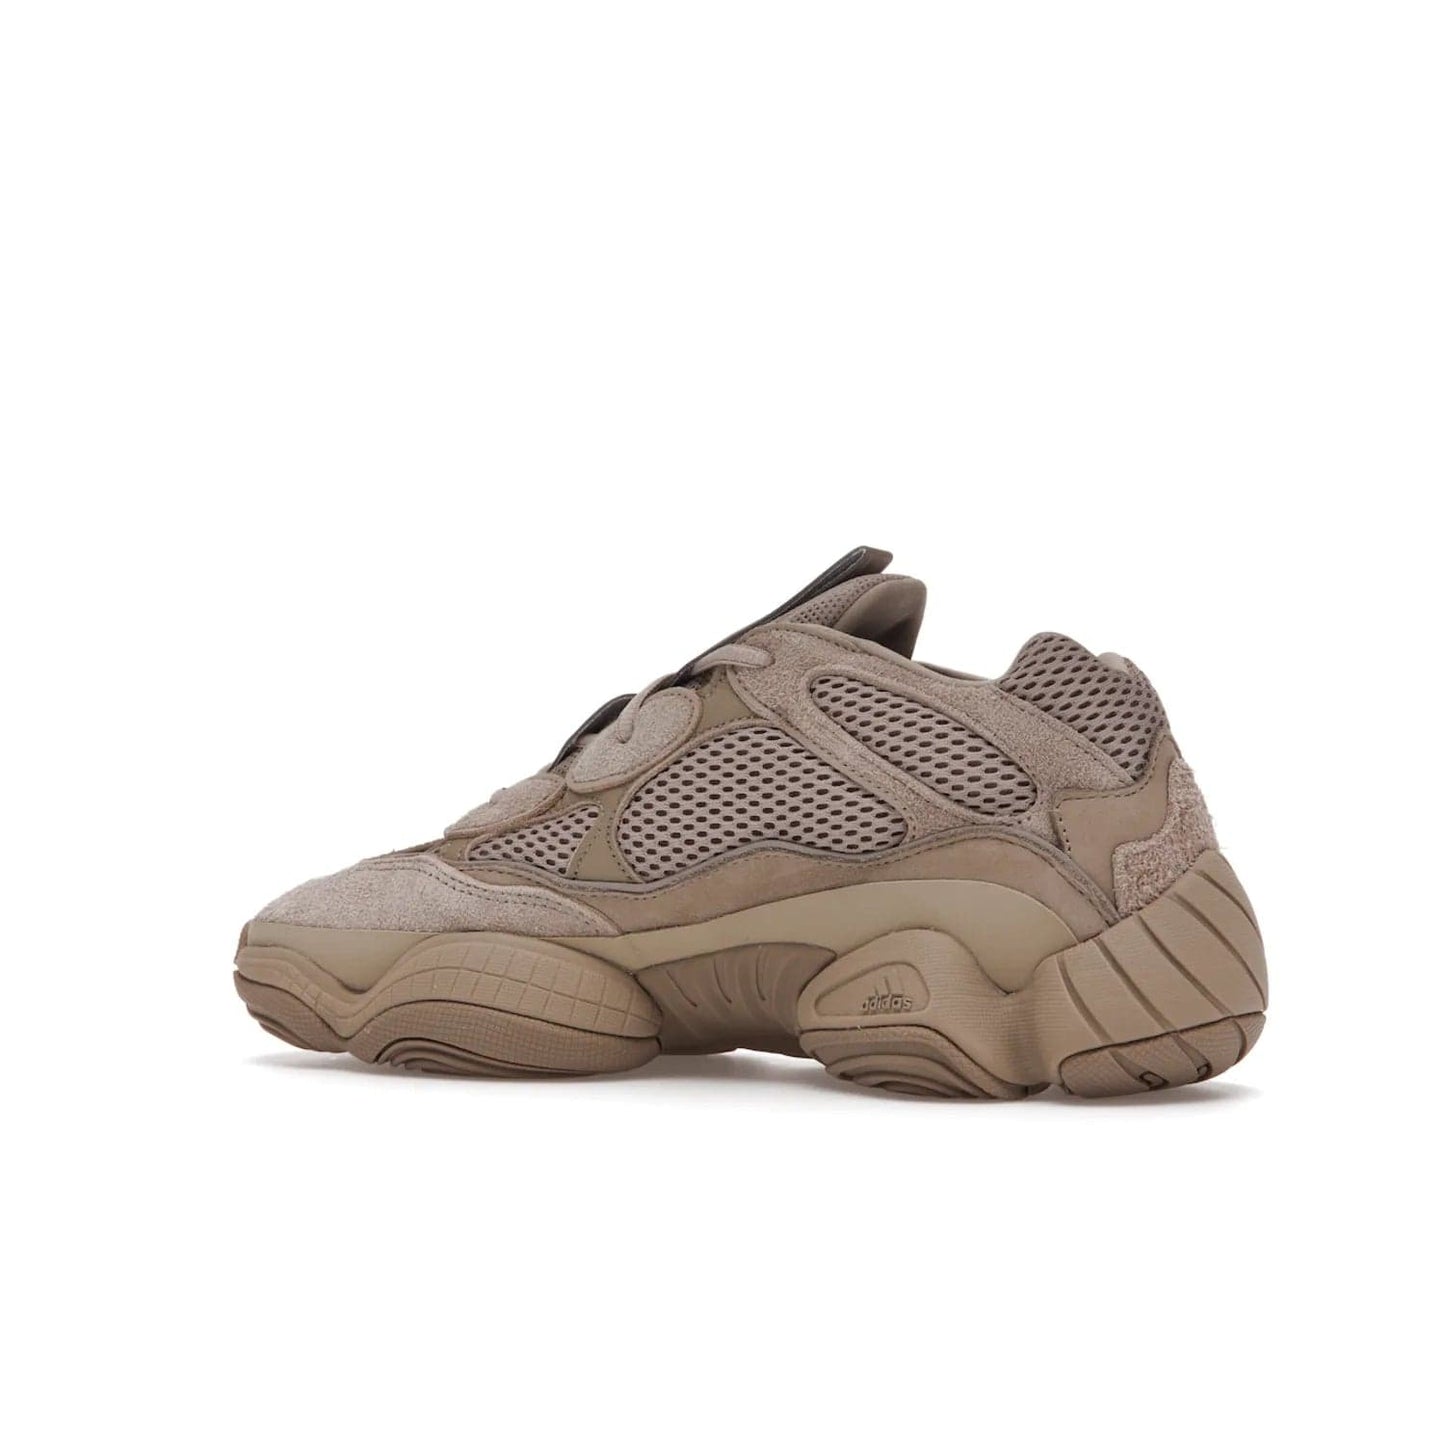 adidas Yeezy 500 Taupe Light - Image 22 - Only at www.BallersClubKickz.com - The adidas Yeezy 500 Taupe Light combines mesh, leather, and suede, with a durable adiPRENE sole for an eye-catching accessory. Reflective piping adds the perfect finishing touches to this unique silhouette. Ideal for any wardrobe, releasing in June 2021.